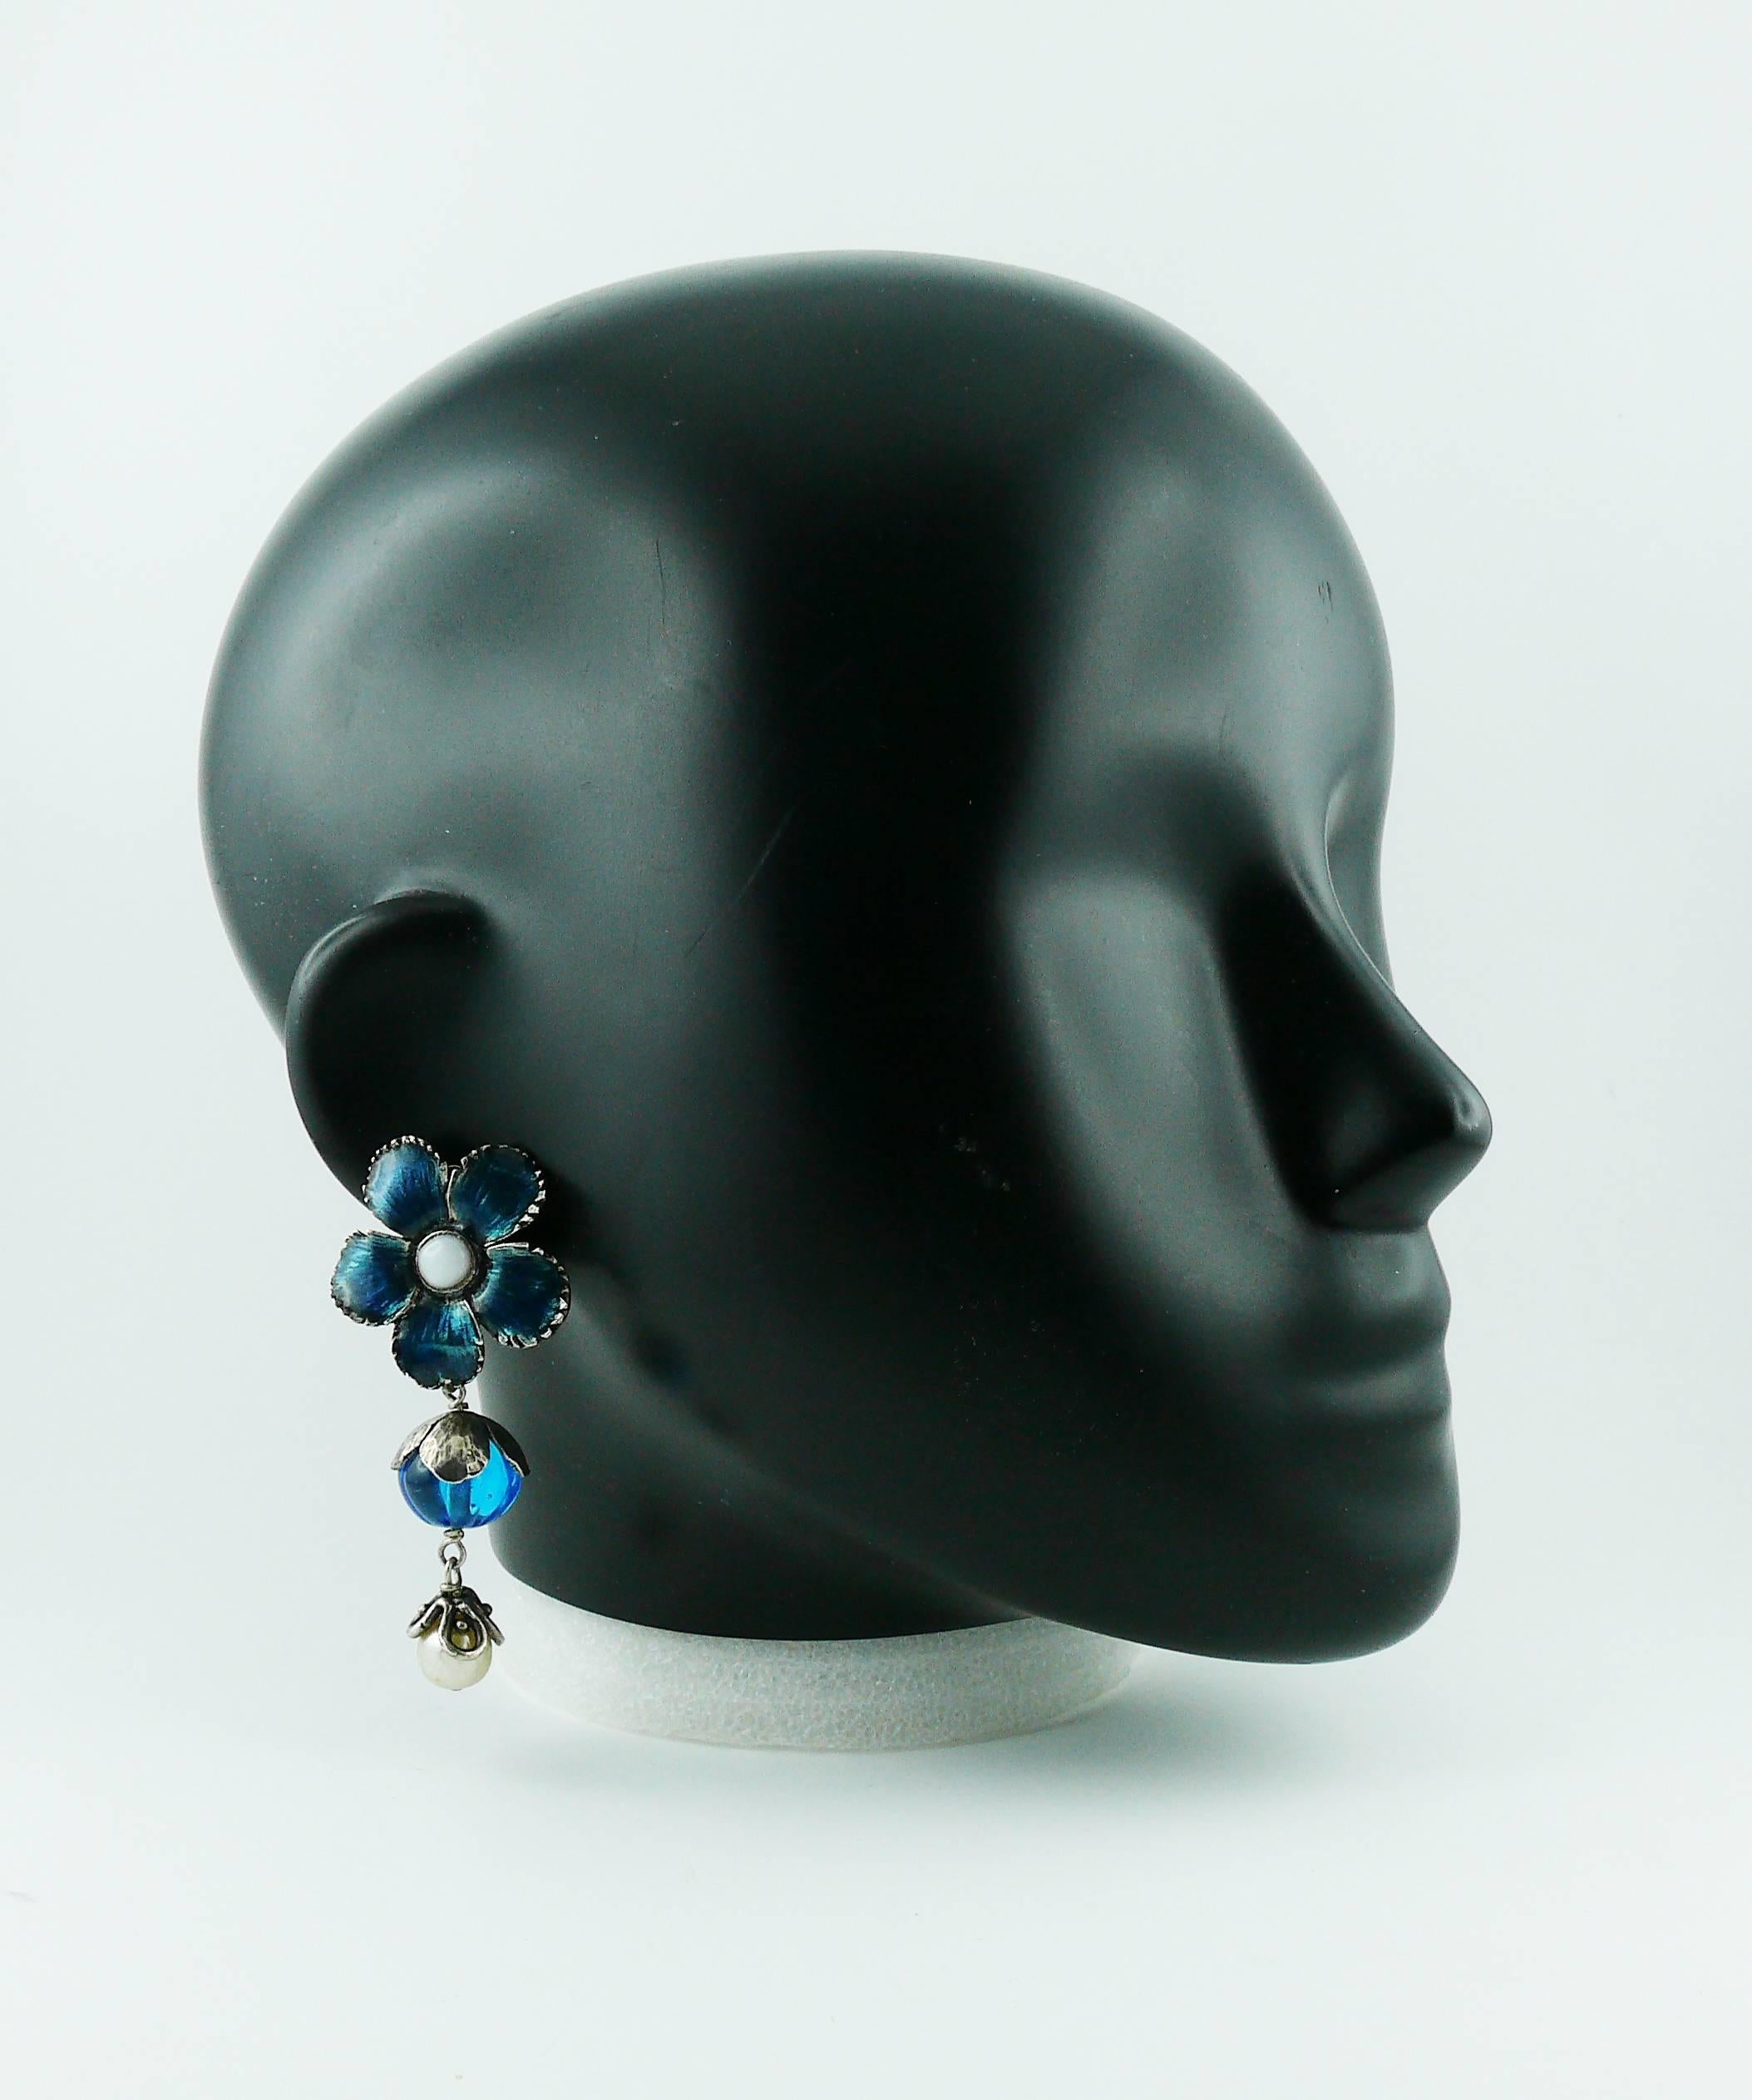 YVES SAINT LAURENT Rive Gauche vintage enameled dangling earrings (clip-on) featuring acqua blue glass bead and faux pearl in an antiqued silver tone setting.

Marked YVES SAINT LAURENT Rive Gauche Made in France.

Indicative measurements : length